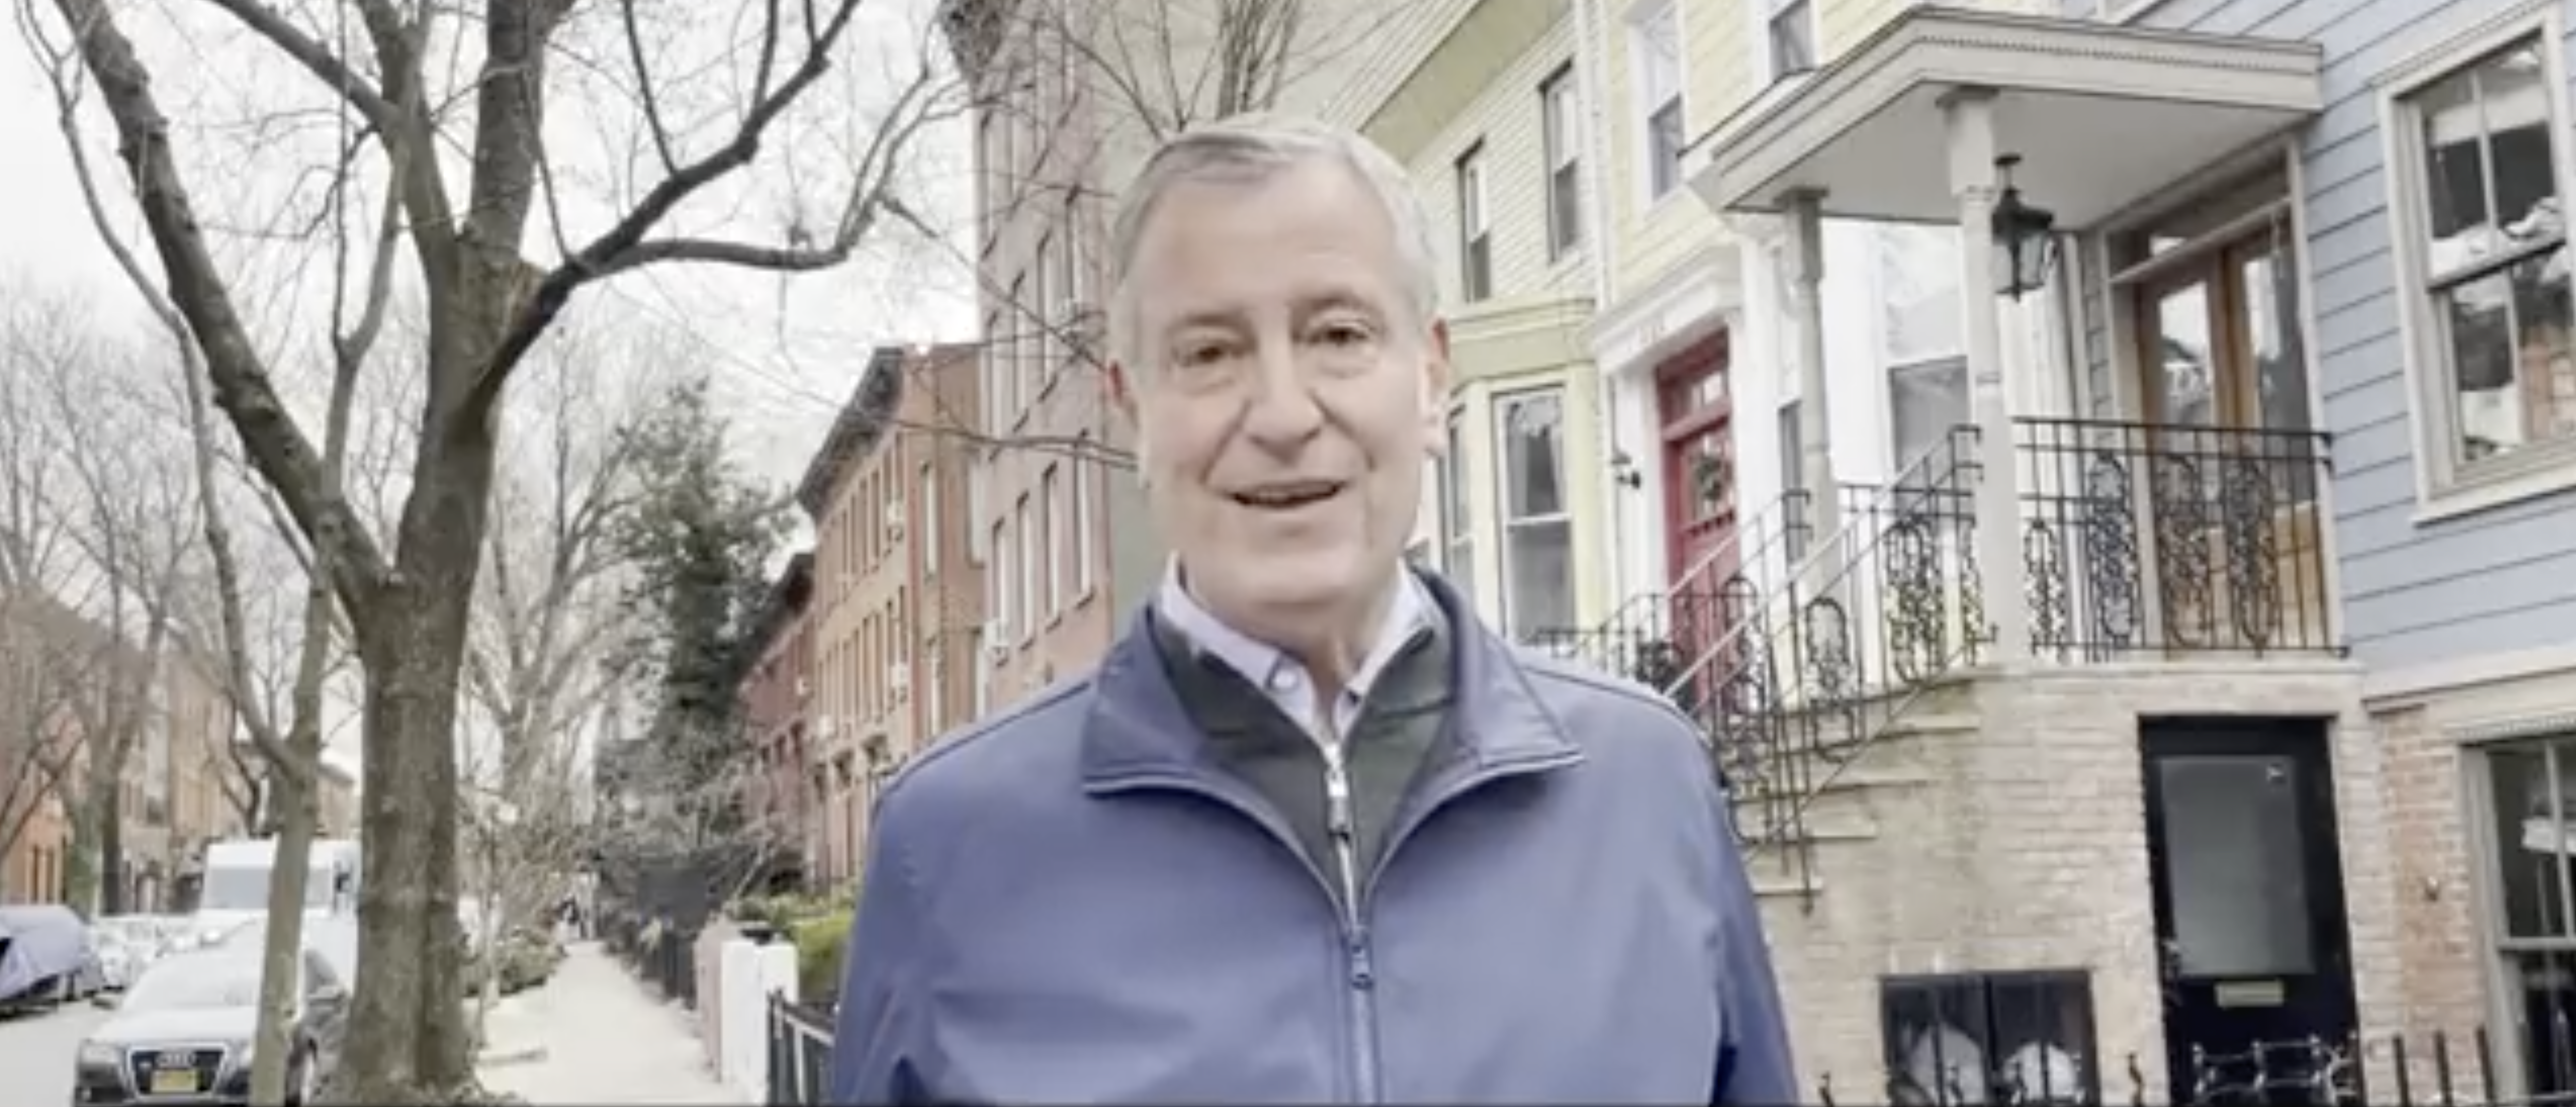 Bill De Blasio Chooses Not To Run For New York Governor